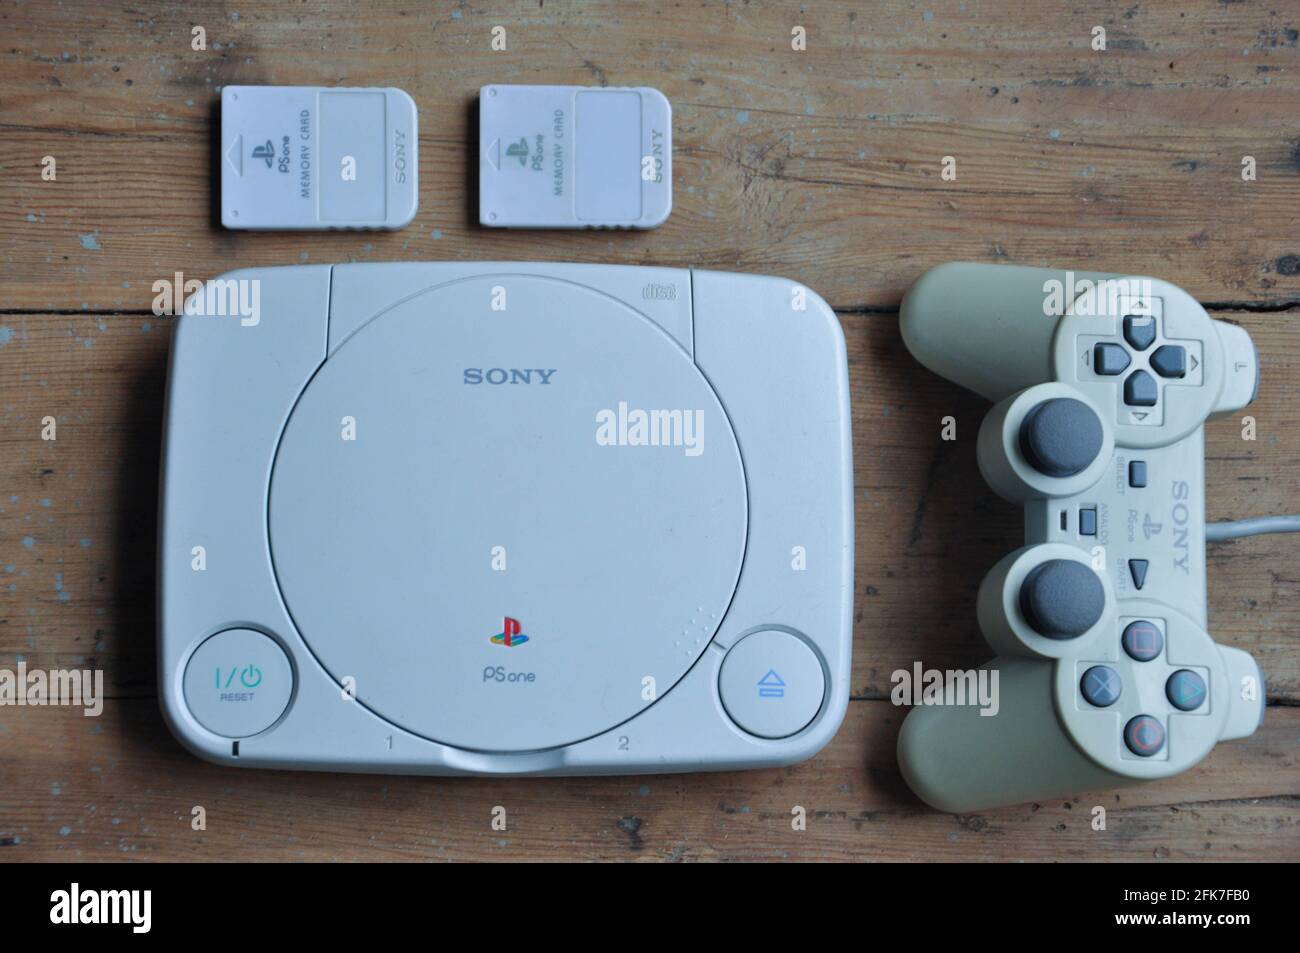 Sony Playstation One Slim with memory cards and controller on wooden table background Stock Photo